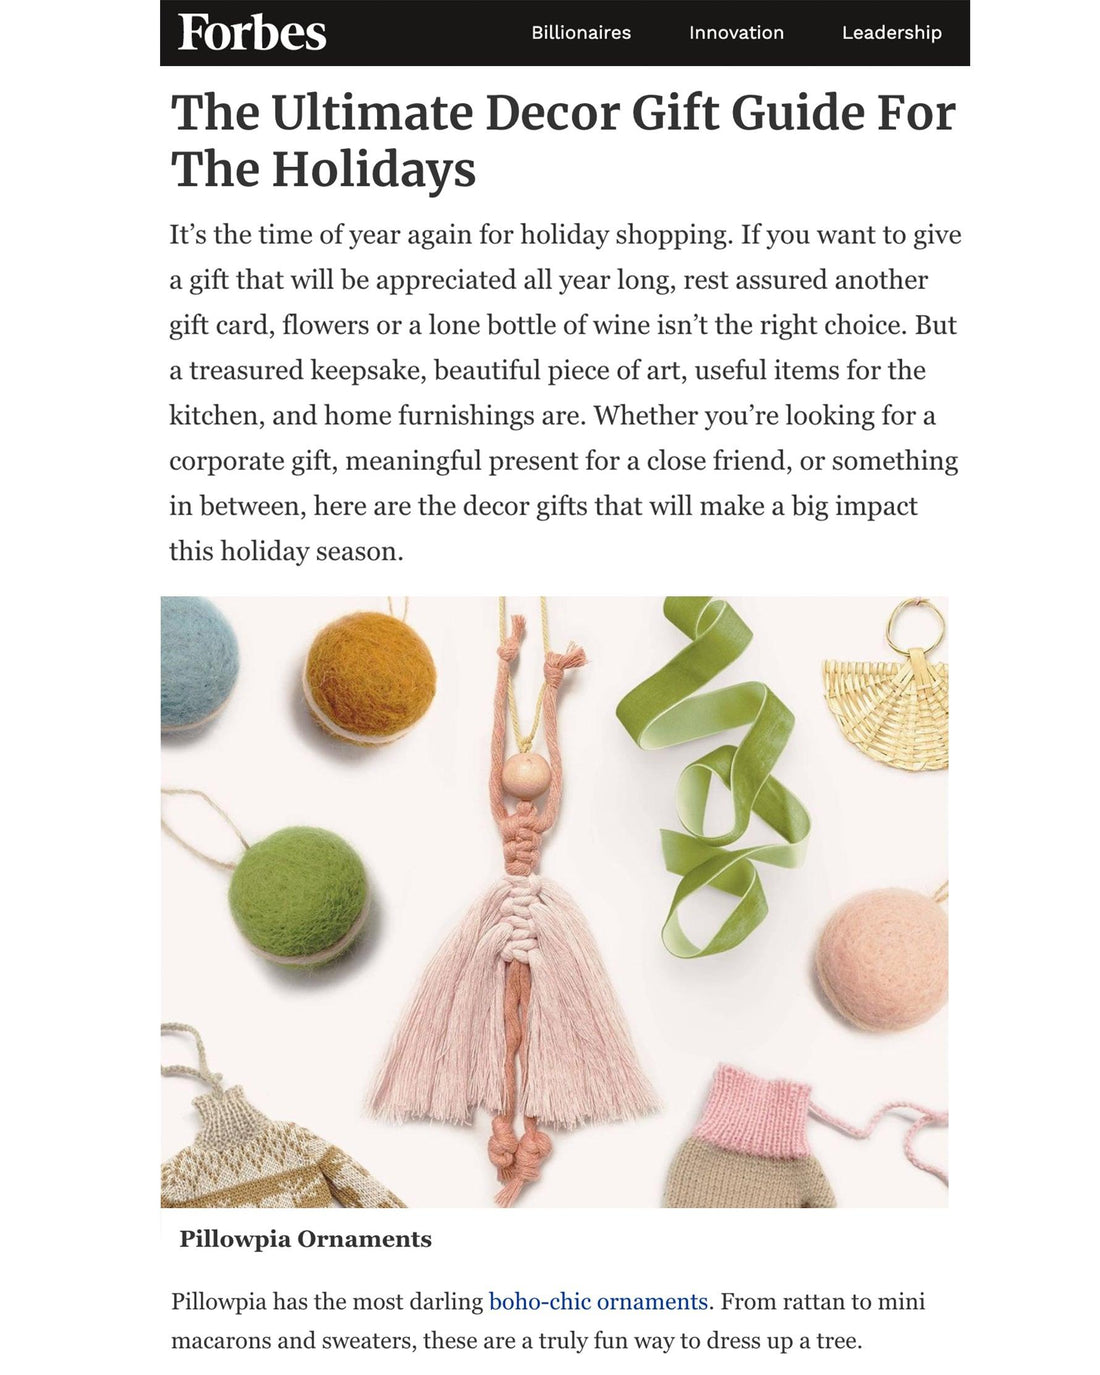 Forbes Ultimate Decor Gift Guide - PILLOWPIA